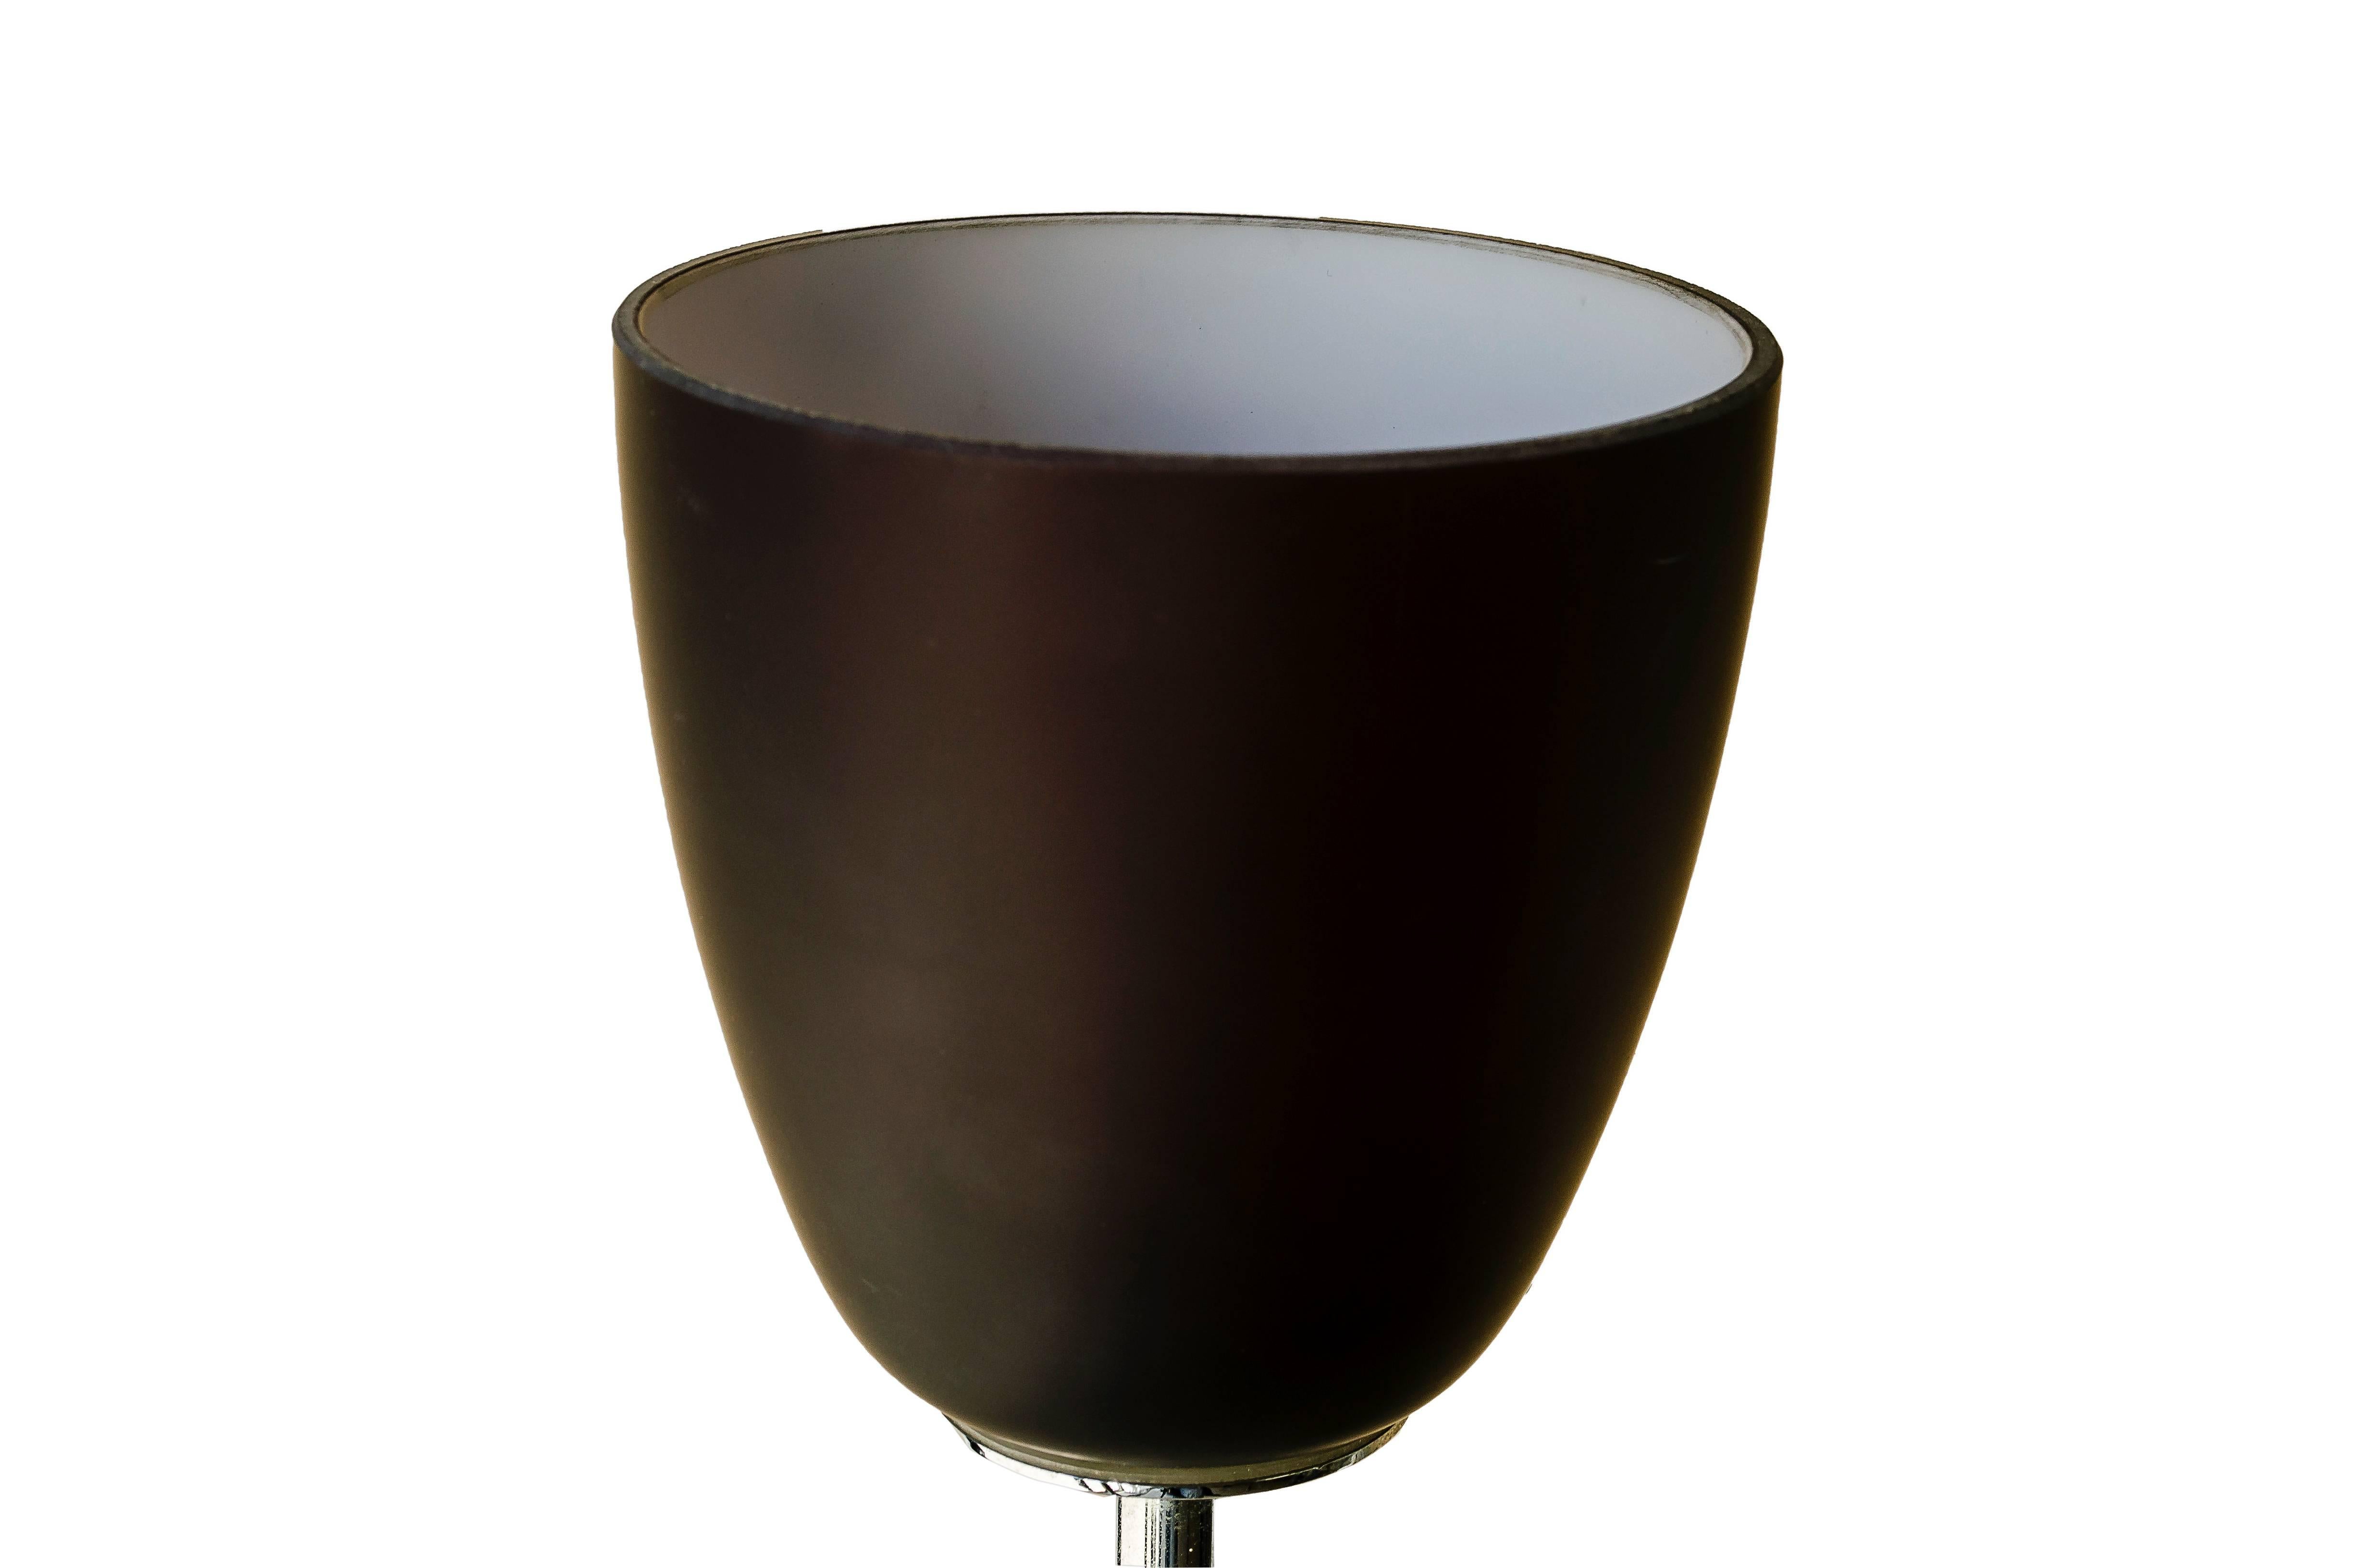 Set of four beautiful eight lights sconces by Fontana Arte, black and white glass cups on chromium plated stem.

Check other nice pieces in our storefront page.